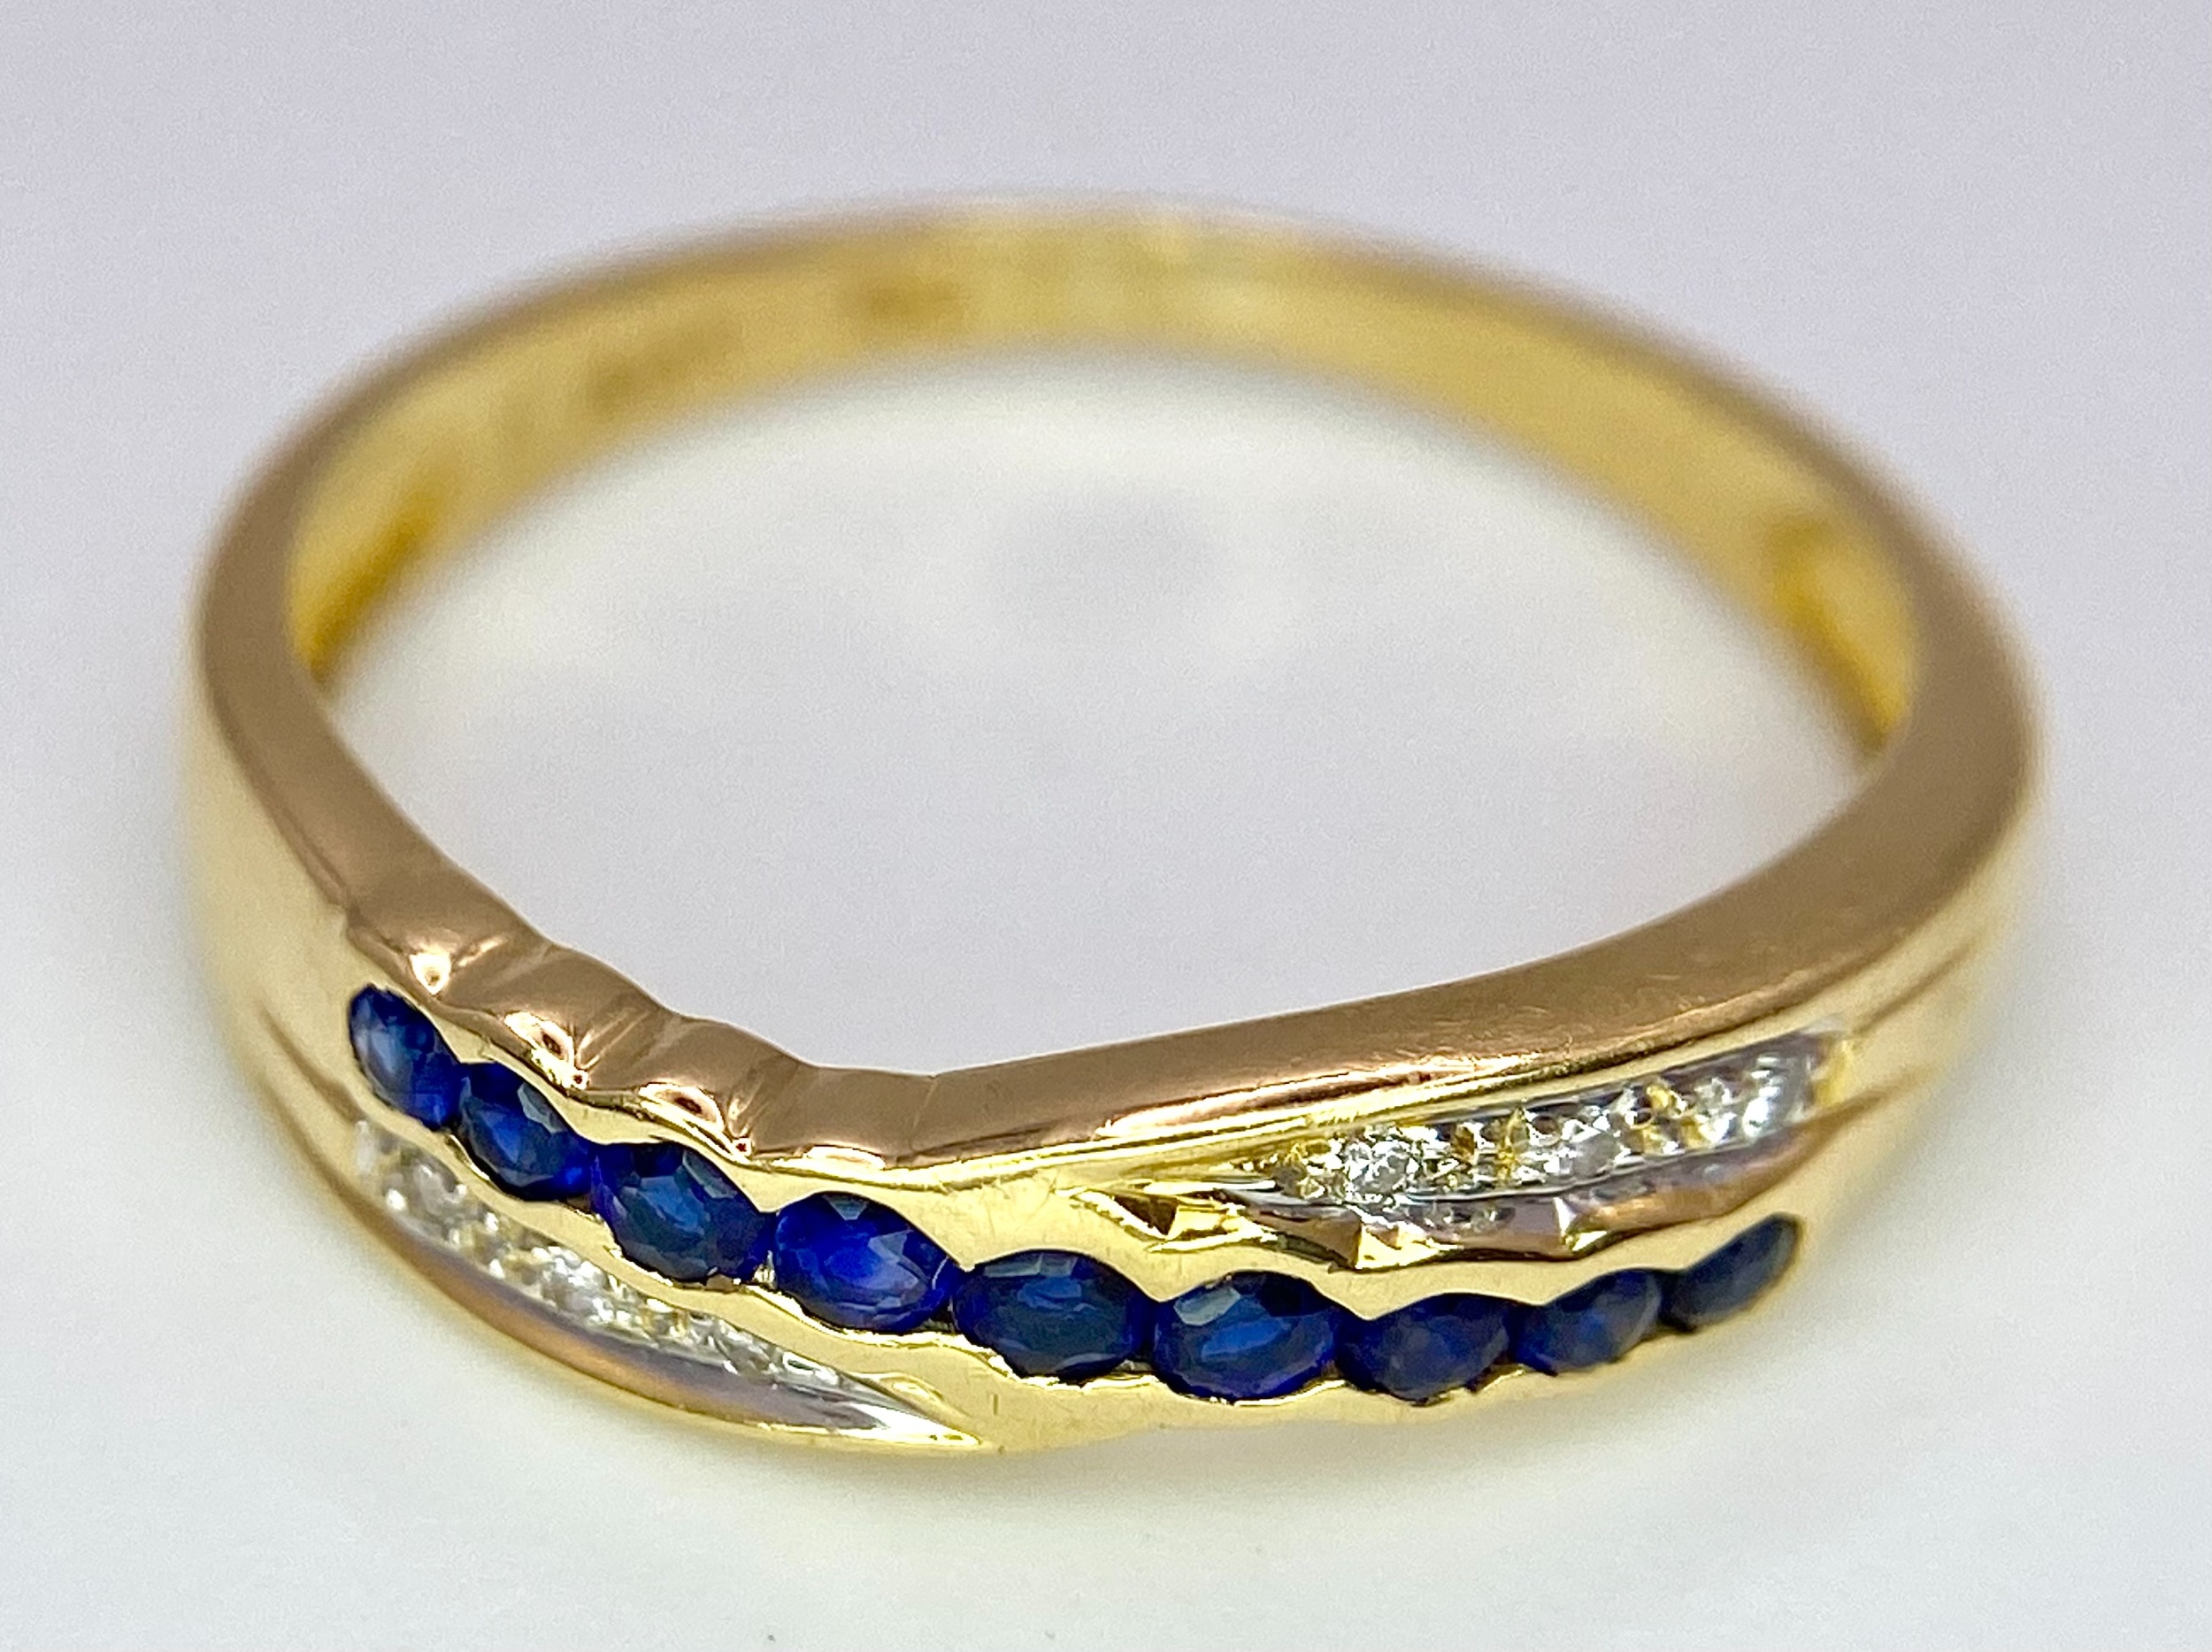 AN 18K YELLOW GOLD DIAMOND & BLUE STONE (PROBABLY SAPPHIRE) CROSSOVER RING. Size O, 2.7g total - Bild 3 aus 6